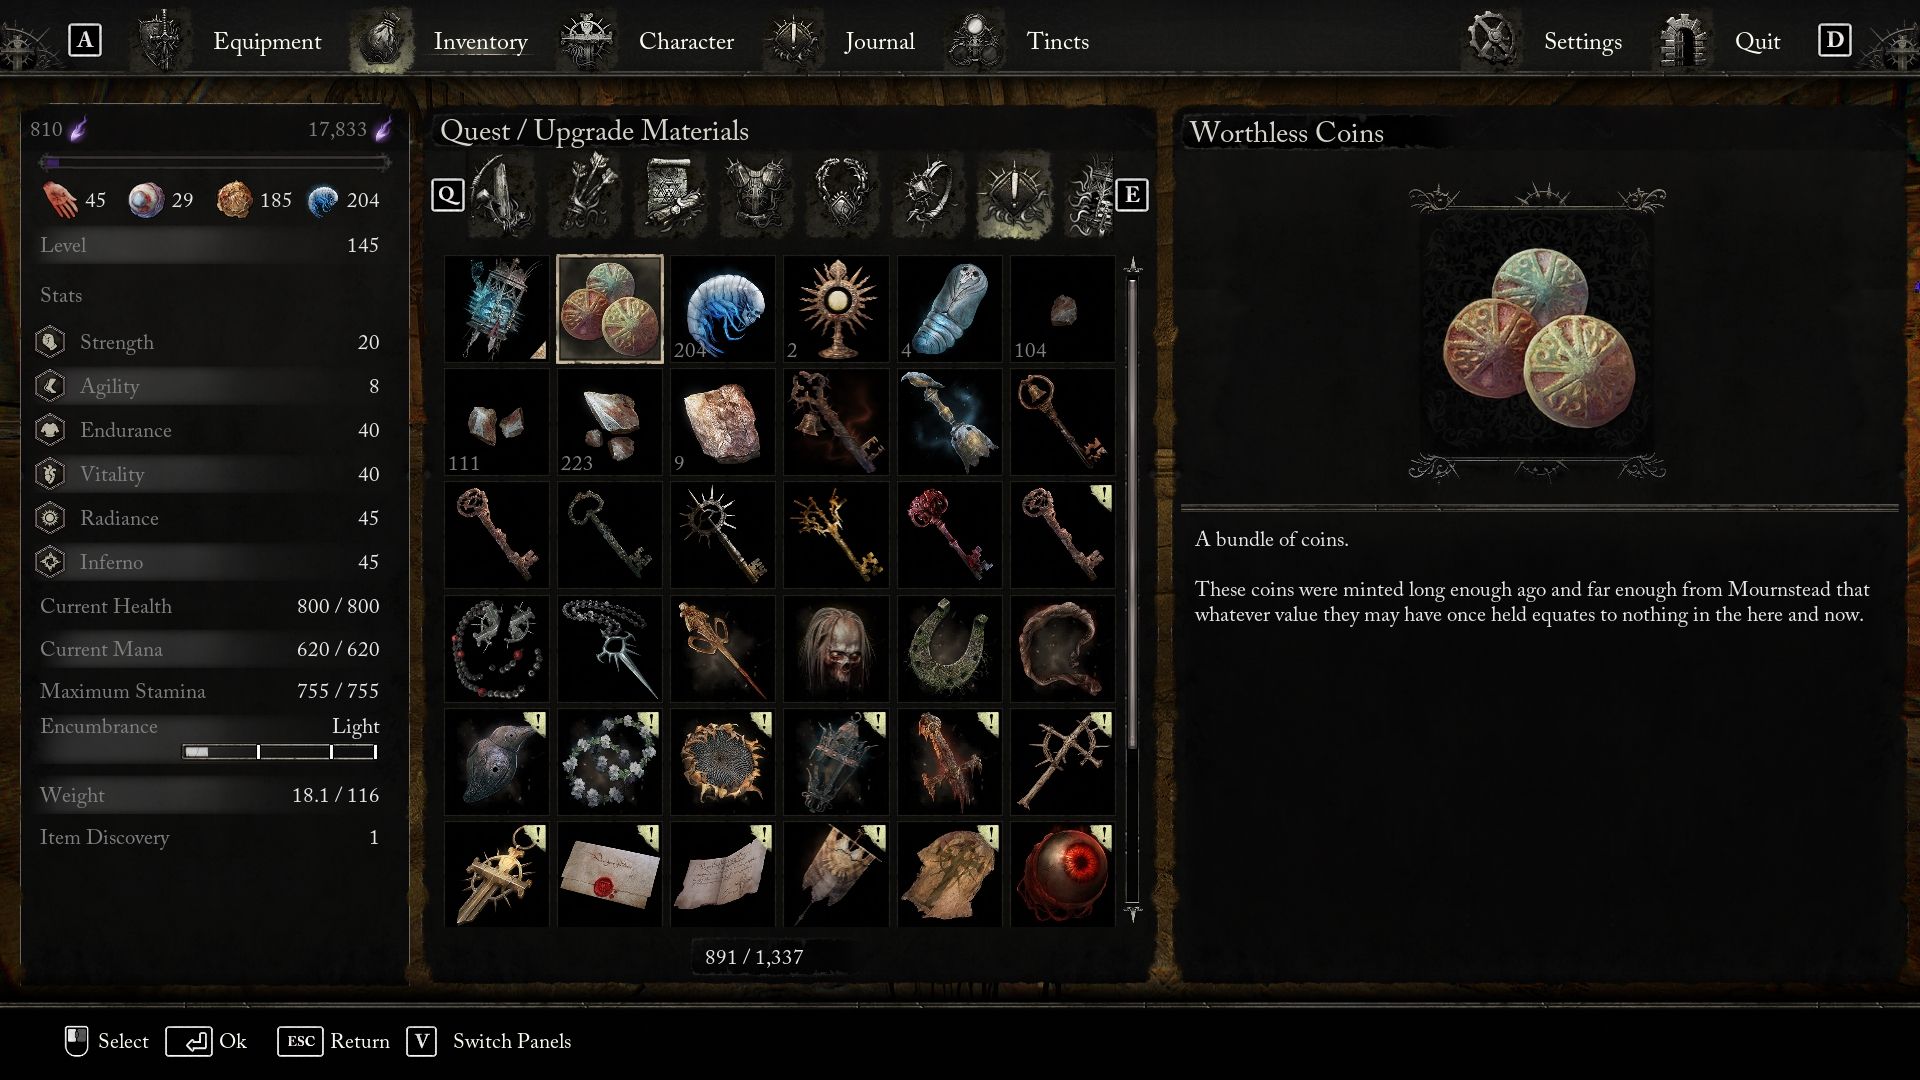 The Worthless Coins item description Lords of the Fallen